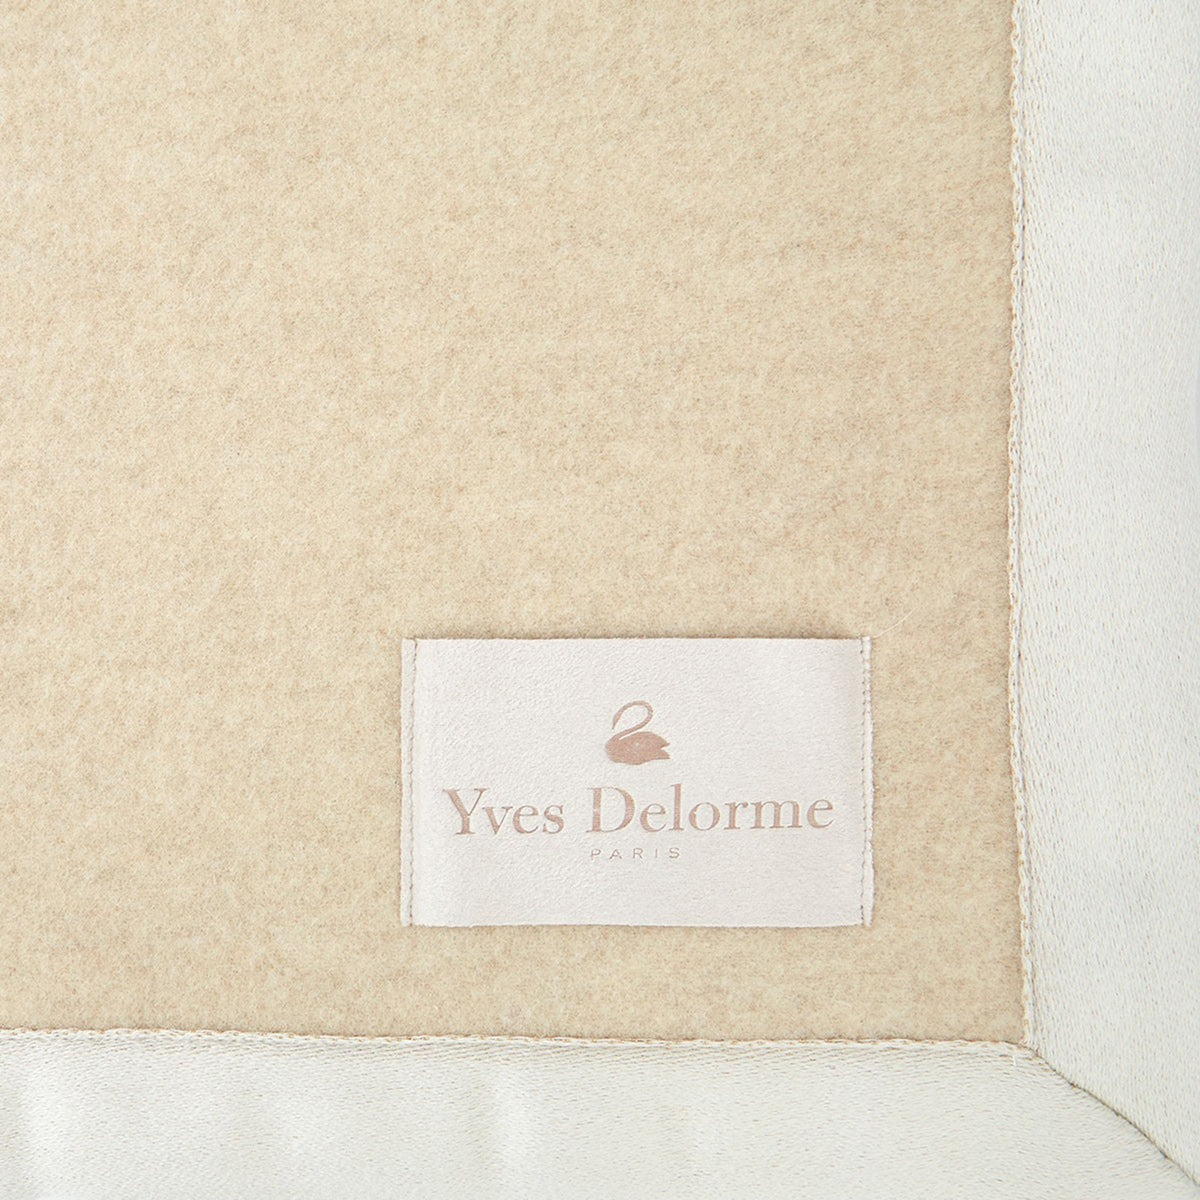 Swatch Sample of Yves Delorme Duchesse Blanket in Pierre Color